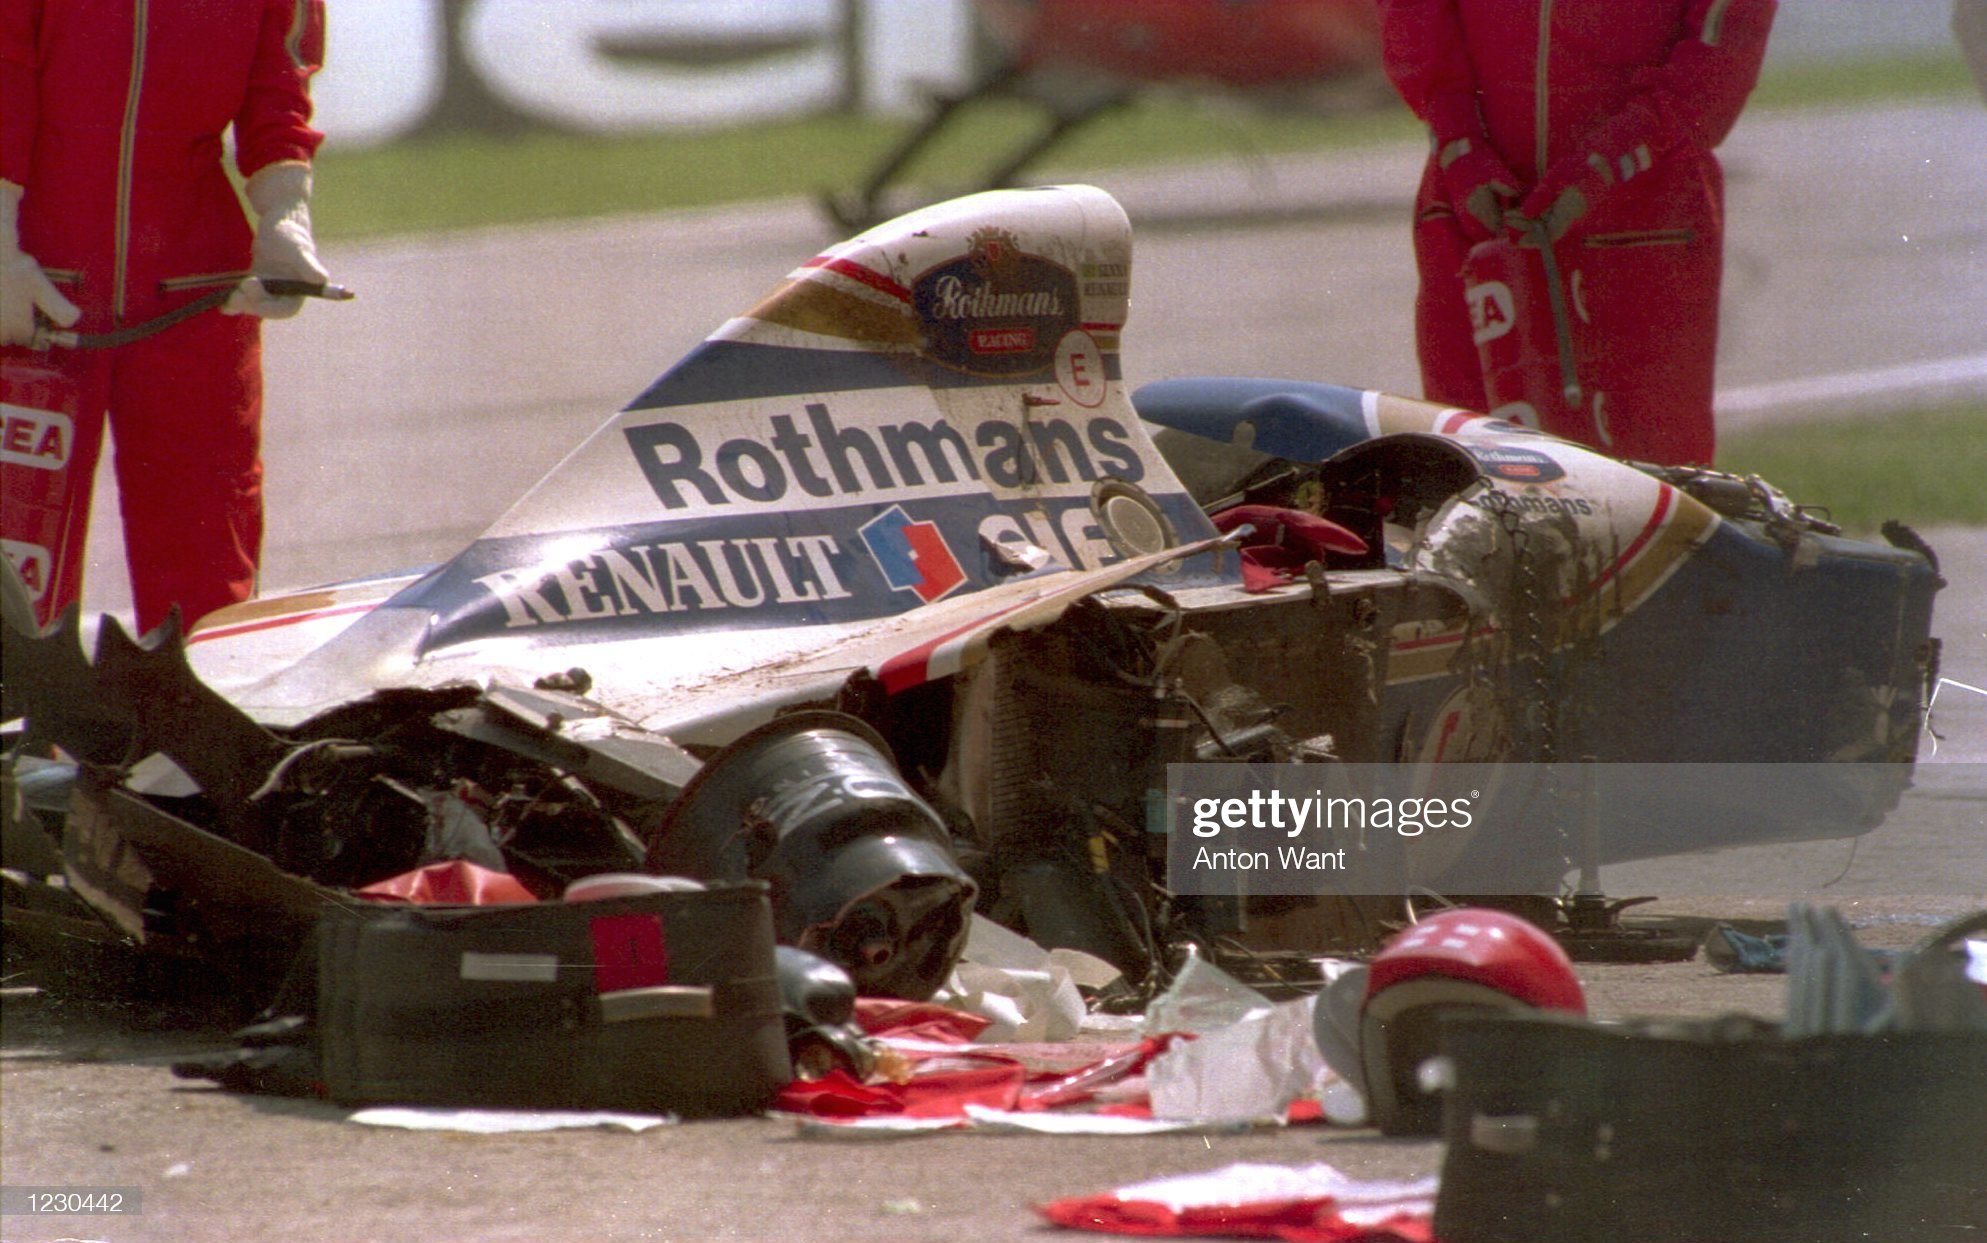 The Williams of Ayrton Senna lies shattered on the track after he crashed into the concrete barrier during the early stages of the San Marino F1 GP at Imola on May 01, 1994.